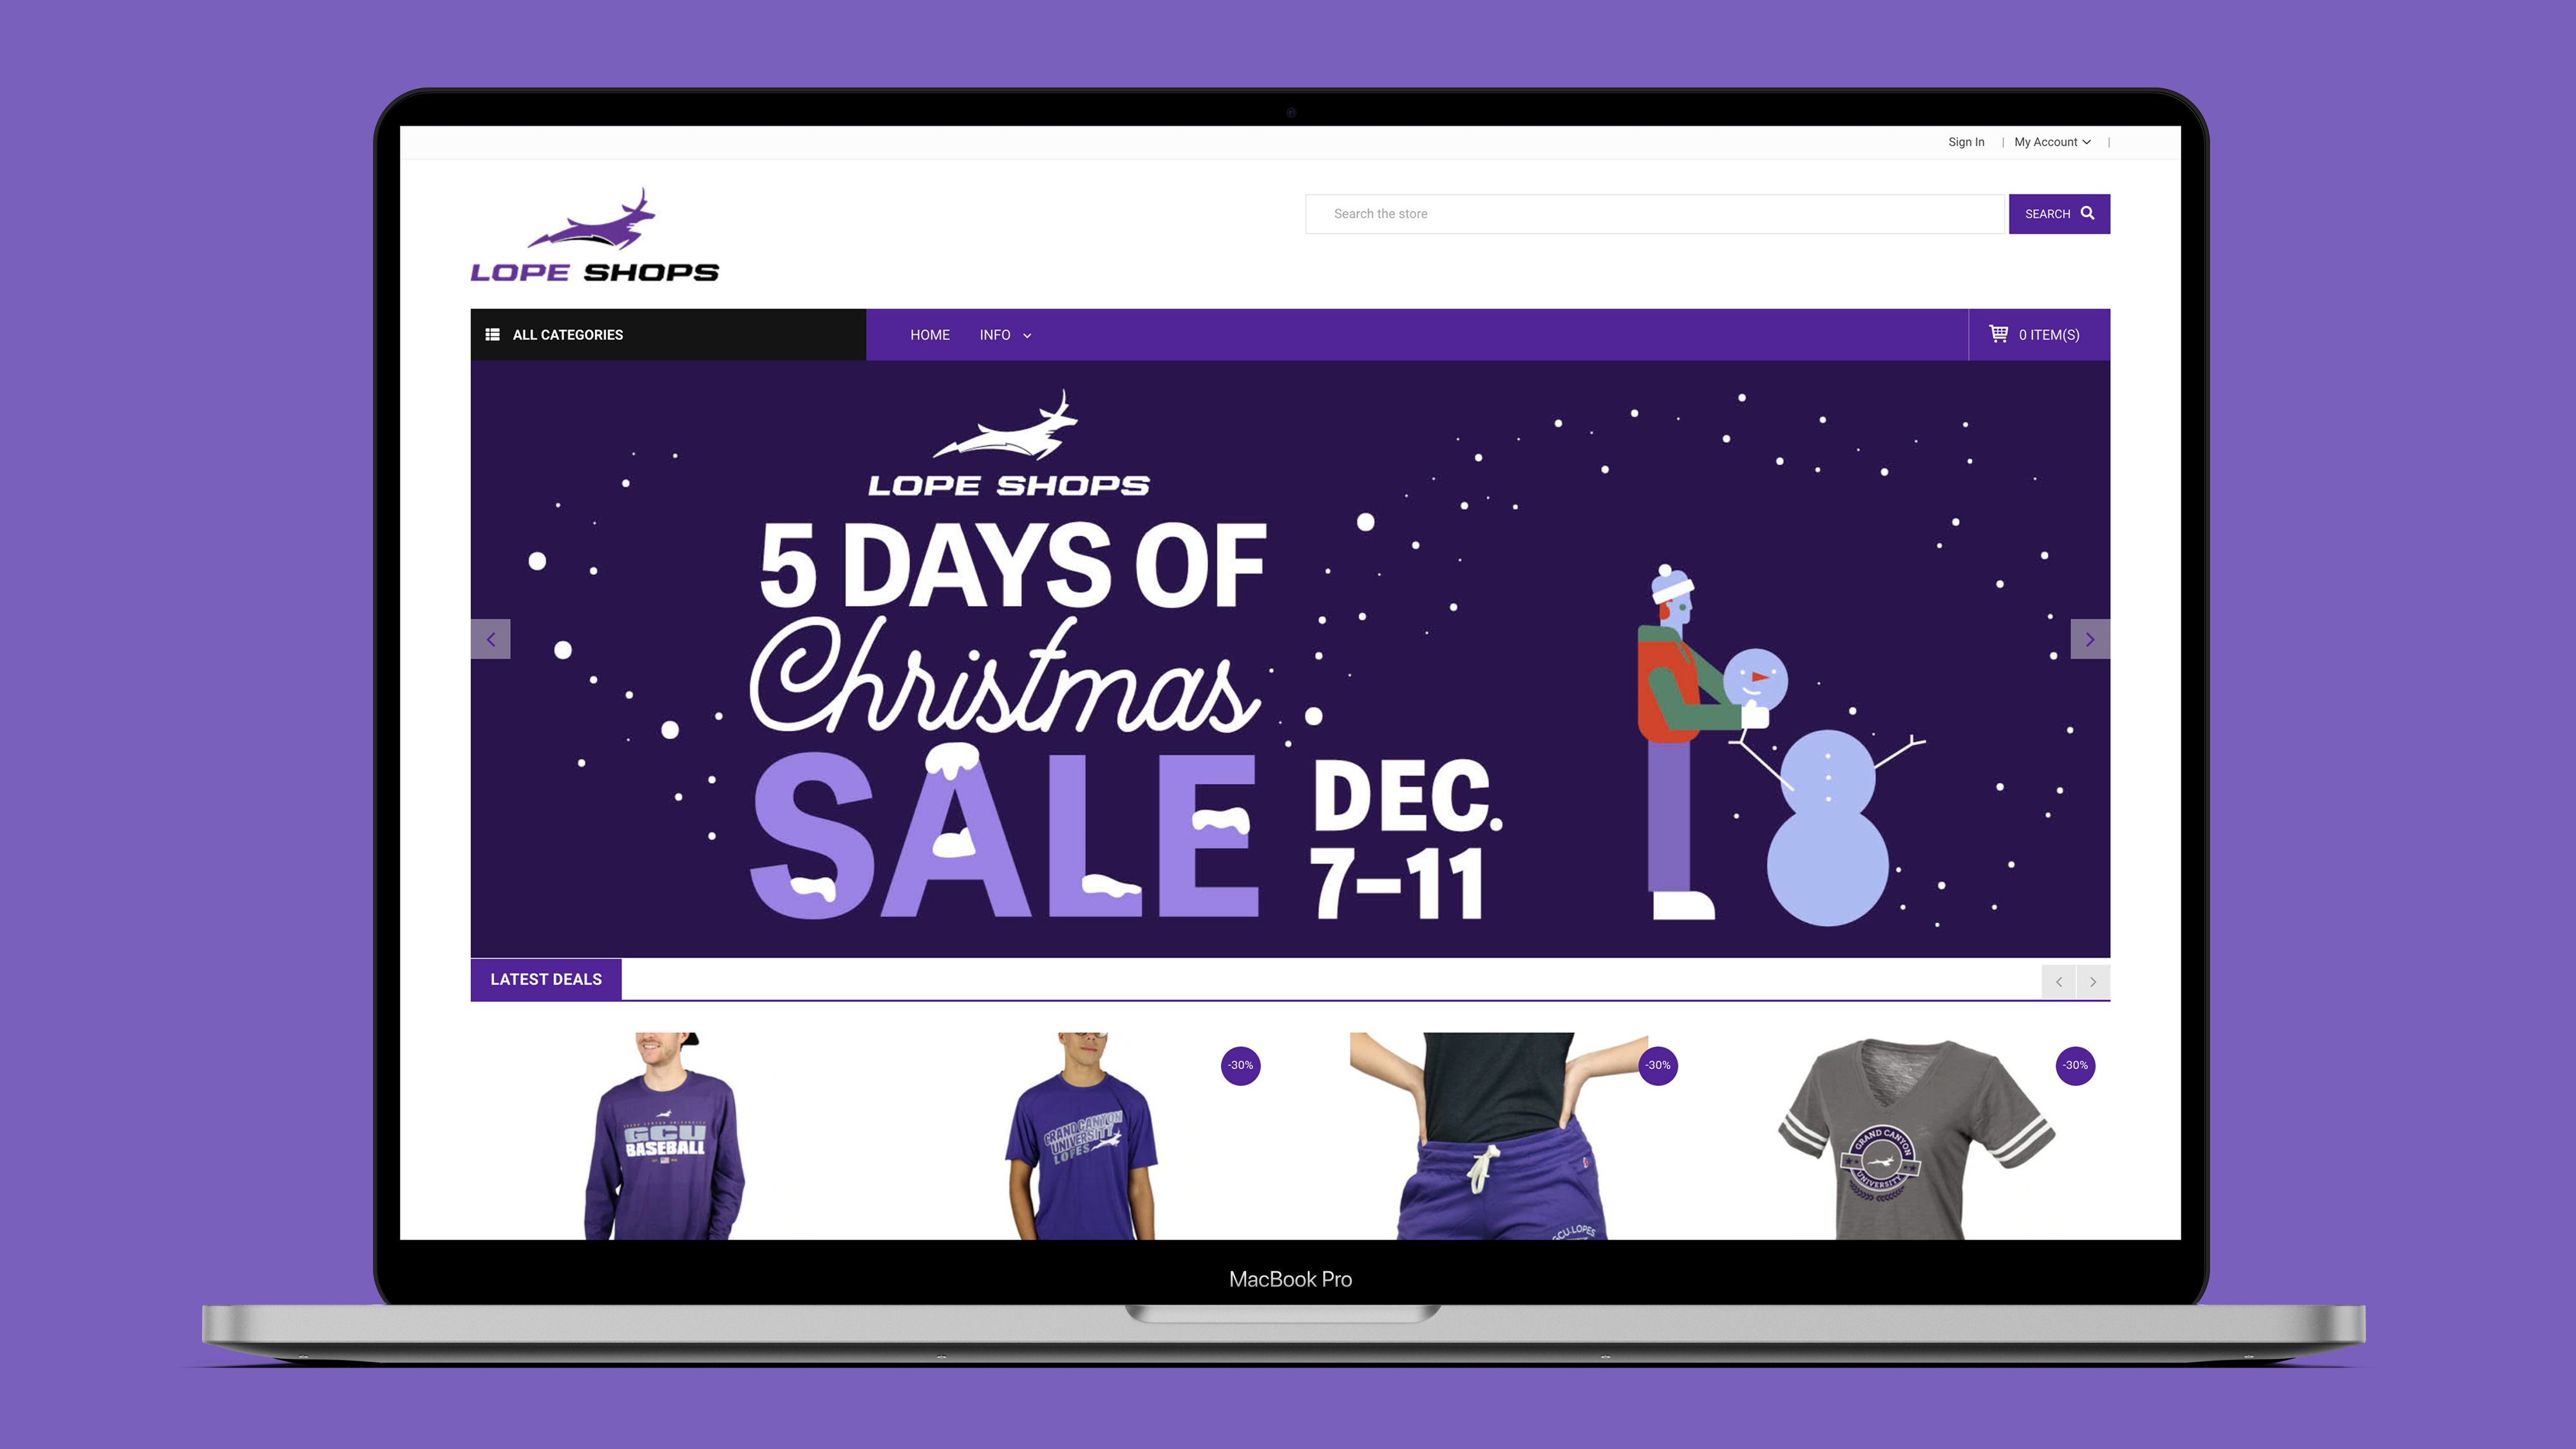 featured image four:Lope Shops 5 Days of Christmas Sale